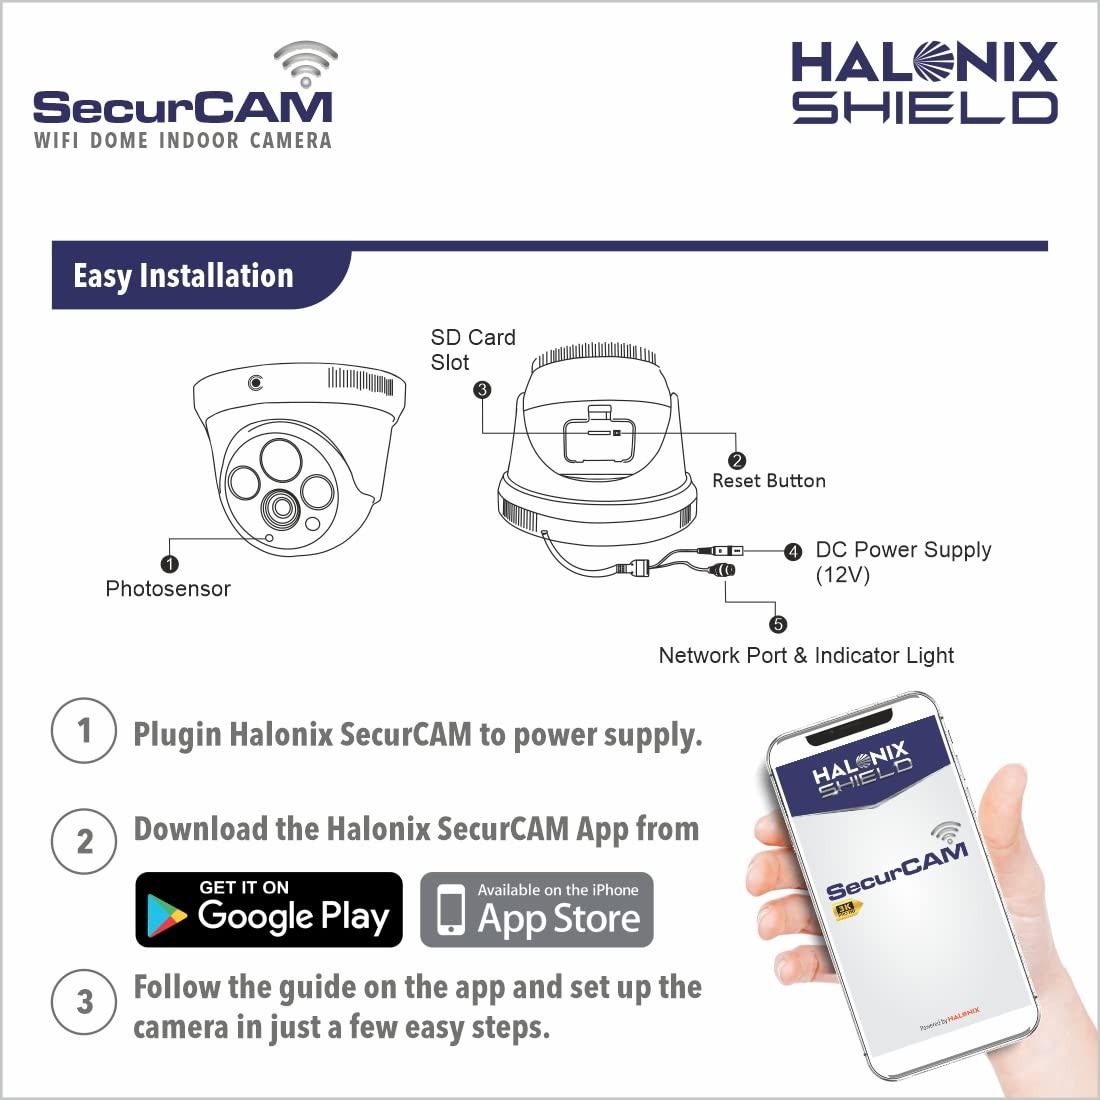 Halonix SecurCAM Wireless 3MP 3K Pro HD Wi-Fi Smart Home Security Dome Camera| 8X Digital Zoom| 2-Way Audio| Night Vision| Motion Detection| Cloud Storage| SD Card Slot| Live View | Alarm Schedule